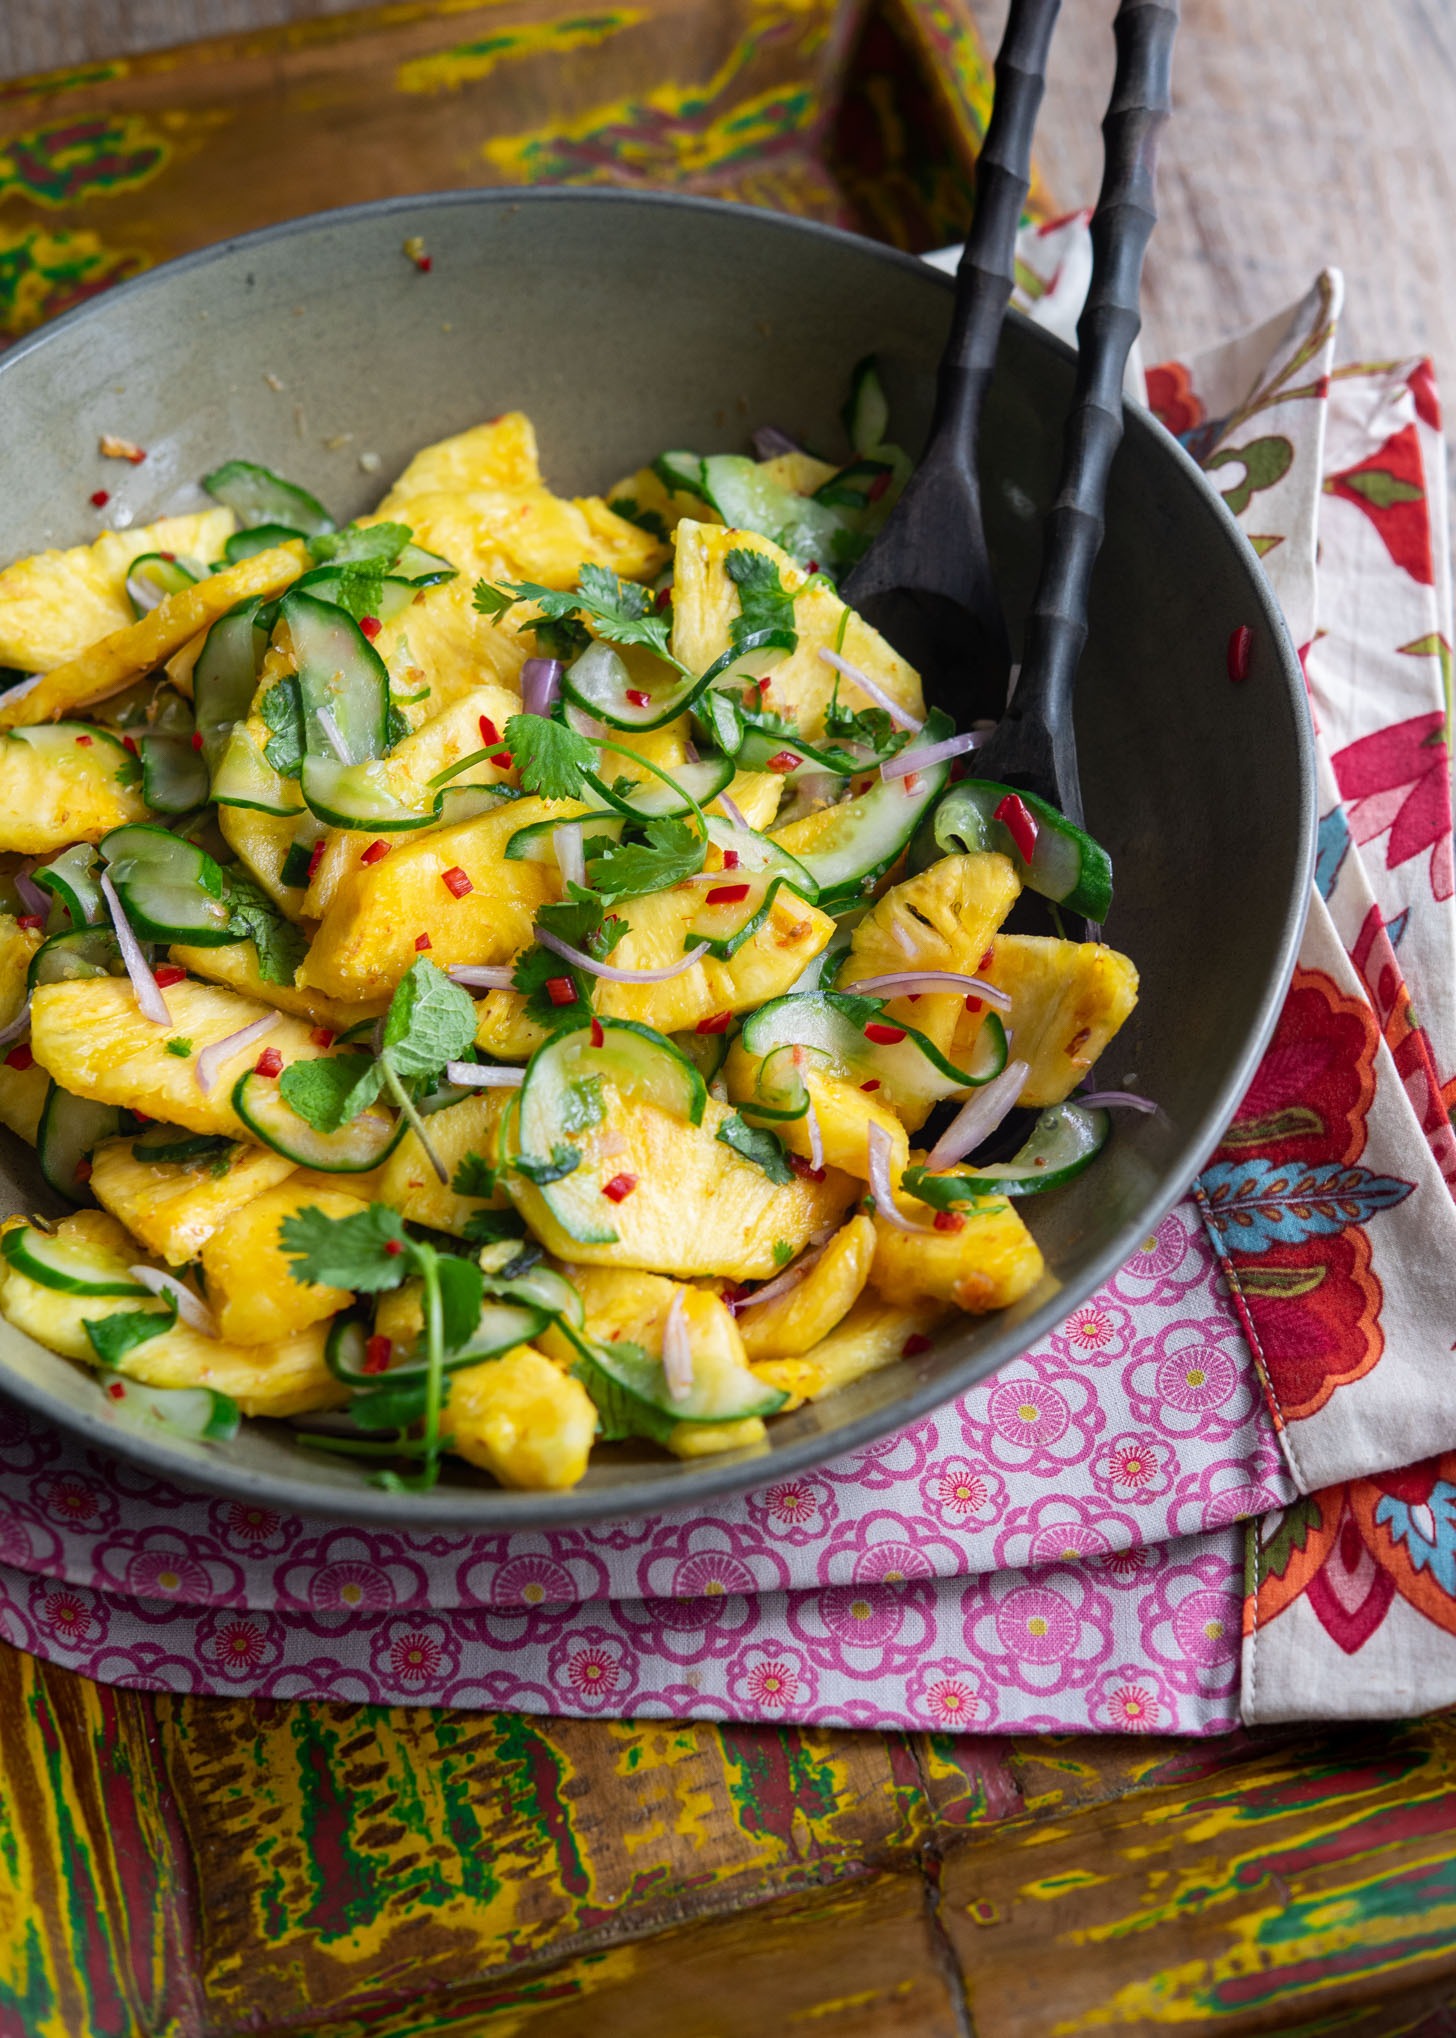 Refreshing Pineapple and cucumber tossed with herbs in a bowl.